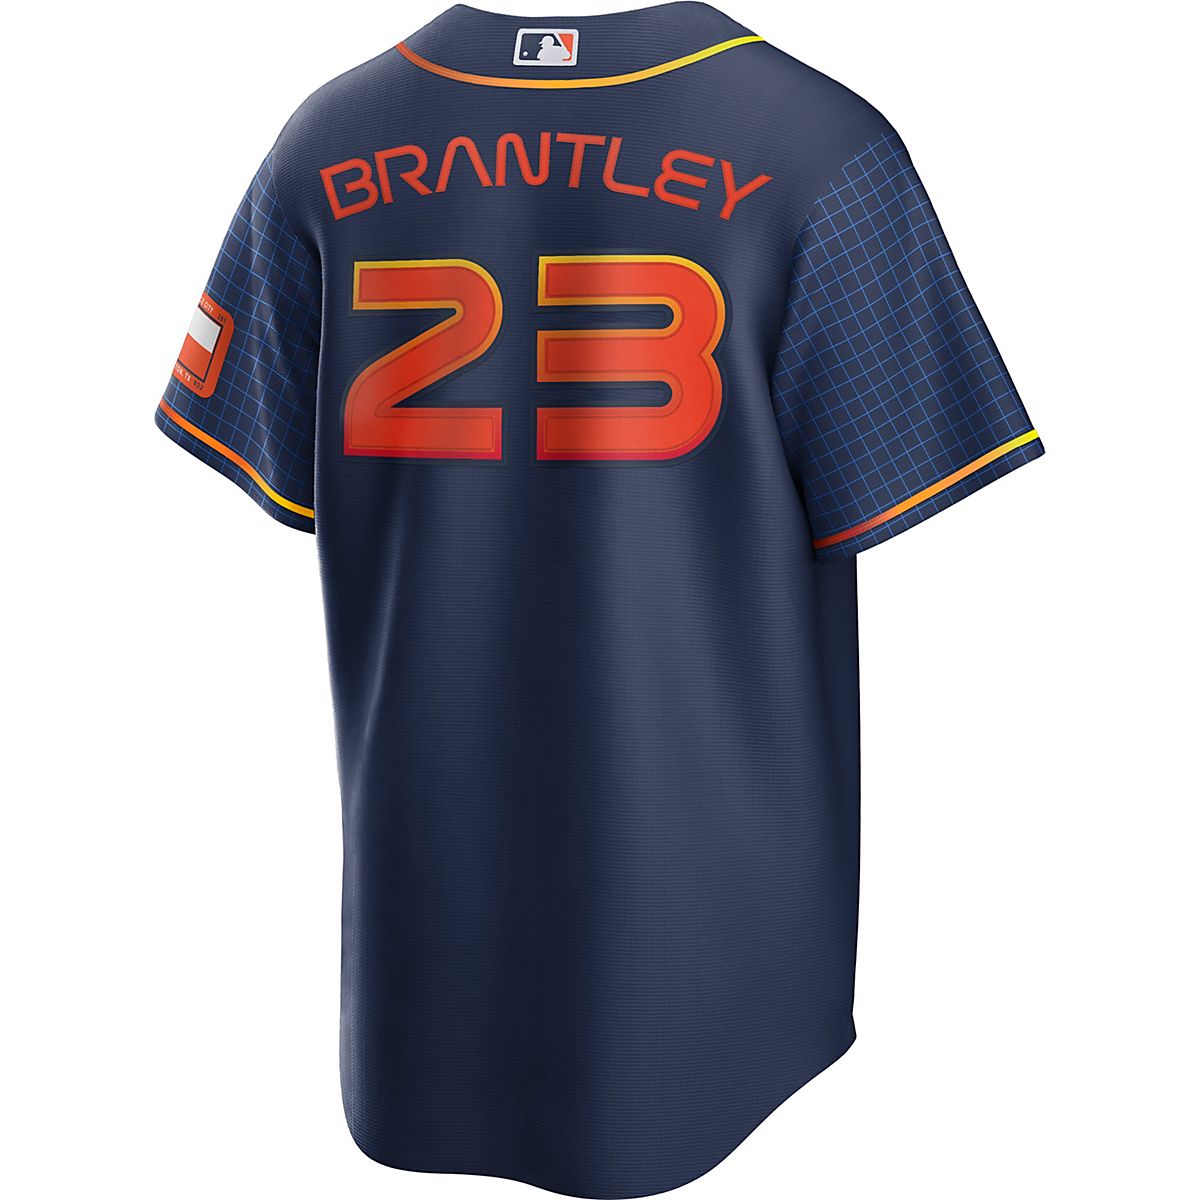 Other, Michael Brantley Houston Astros Space City Jersey Nwt Mens Medium